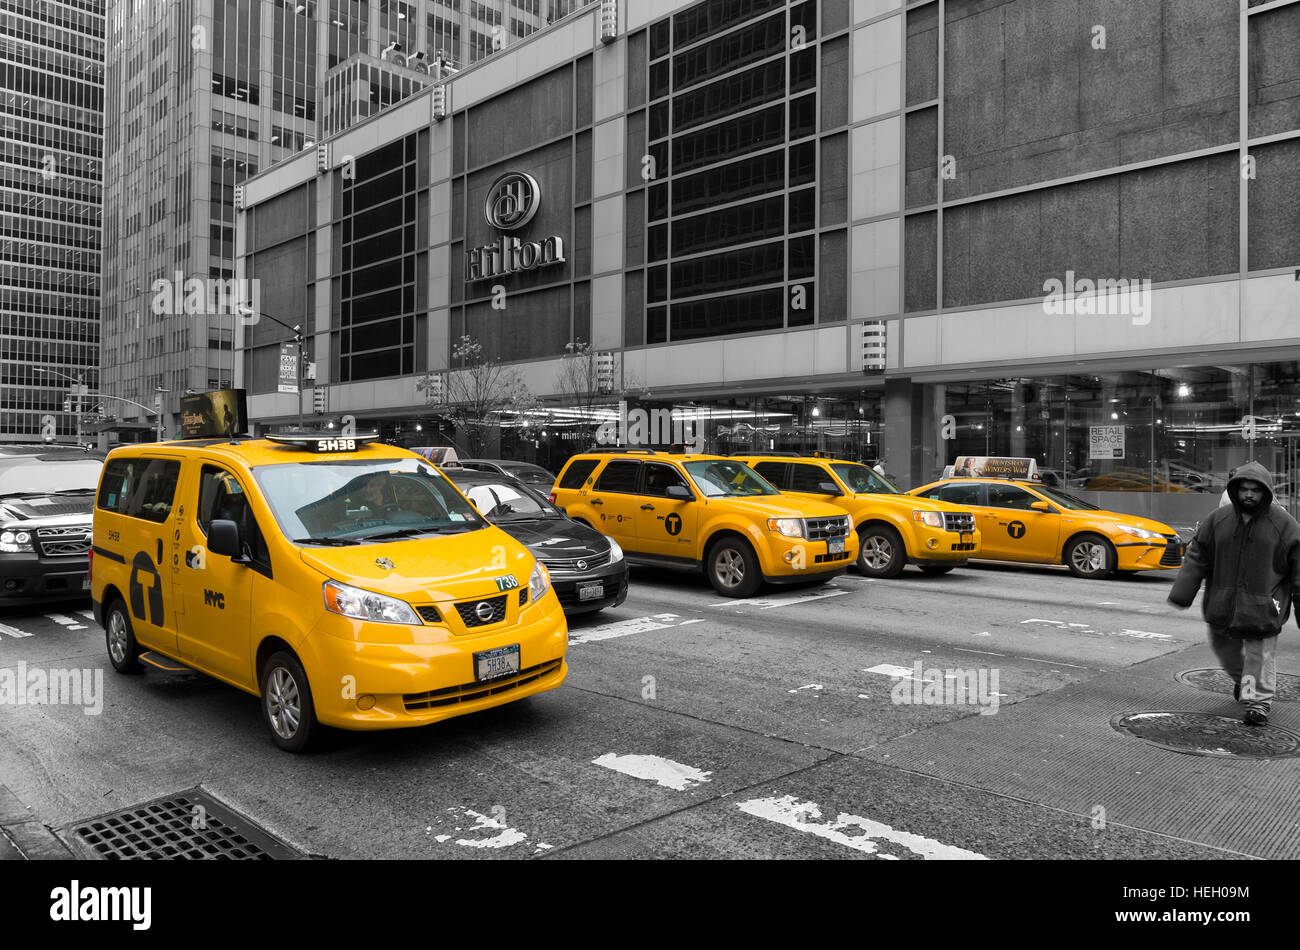 NEW YORK - MAY 3, 2016: Typically yellow medallion taxicabs in front of the New York Hilton. They are widely recognized icons of the city and come in Stock Photo